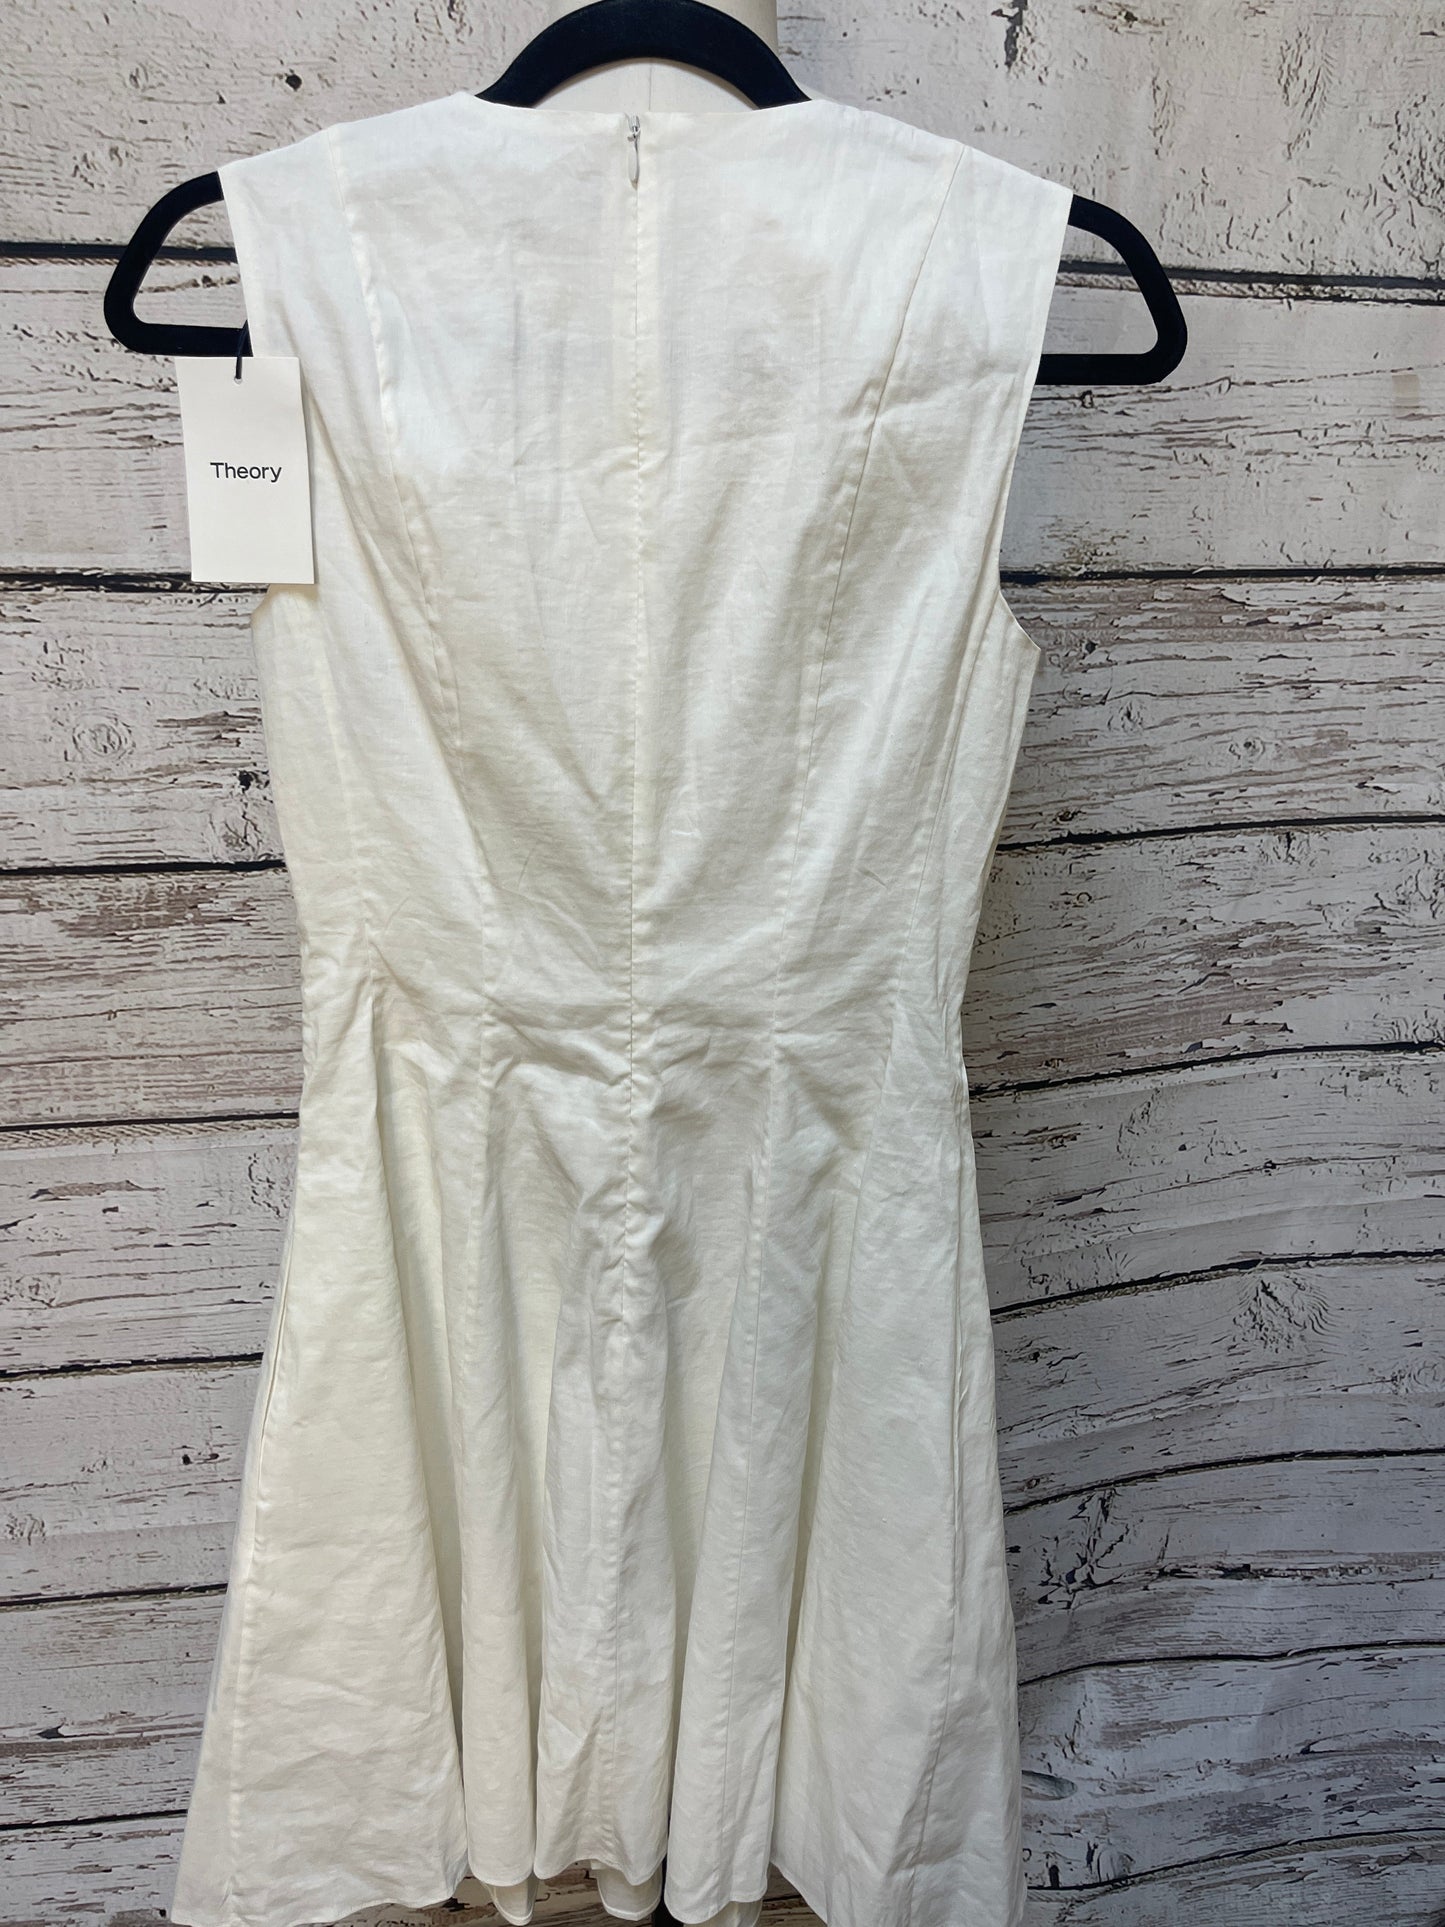 White Dress Casual Short Theory, Size 0